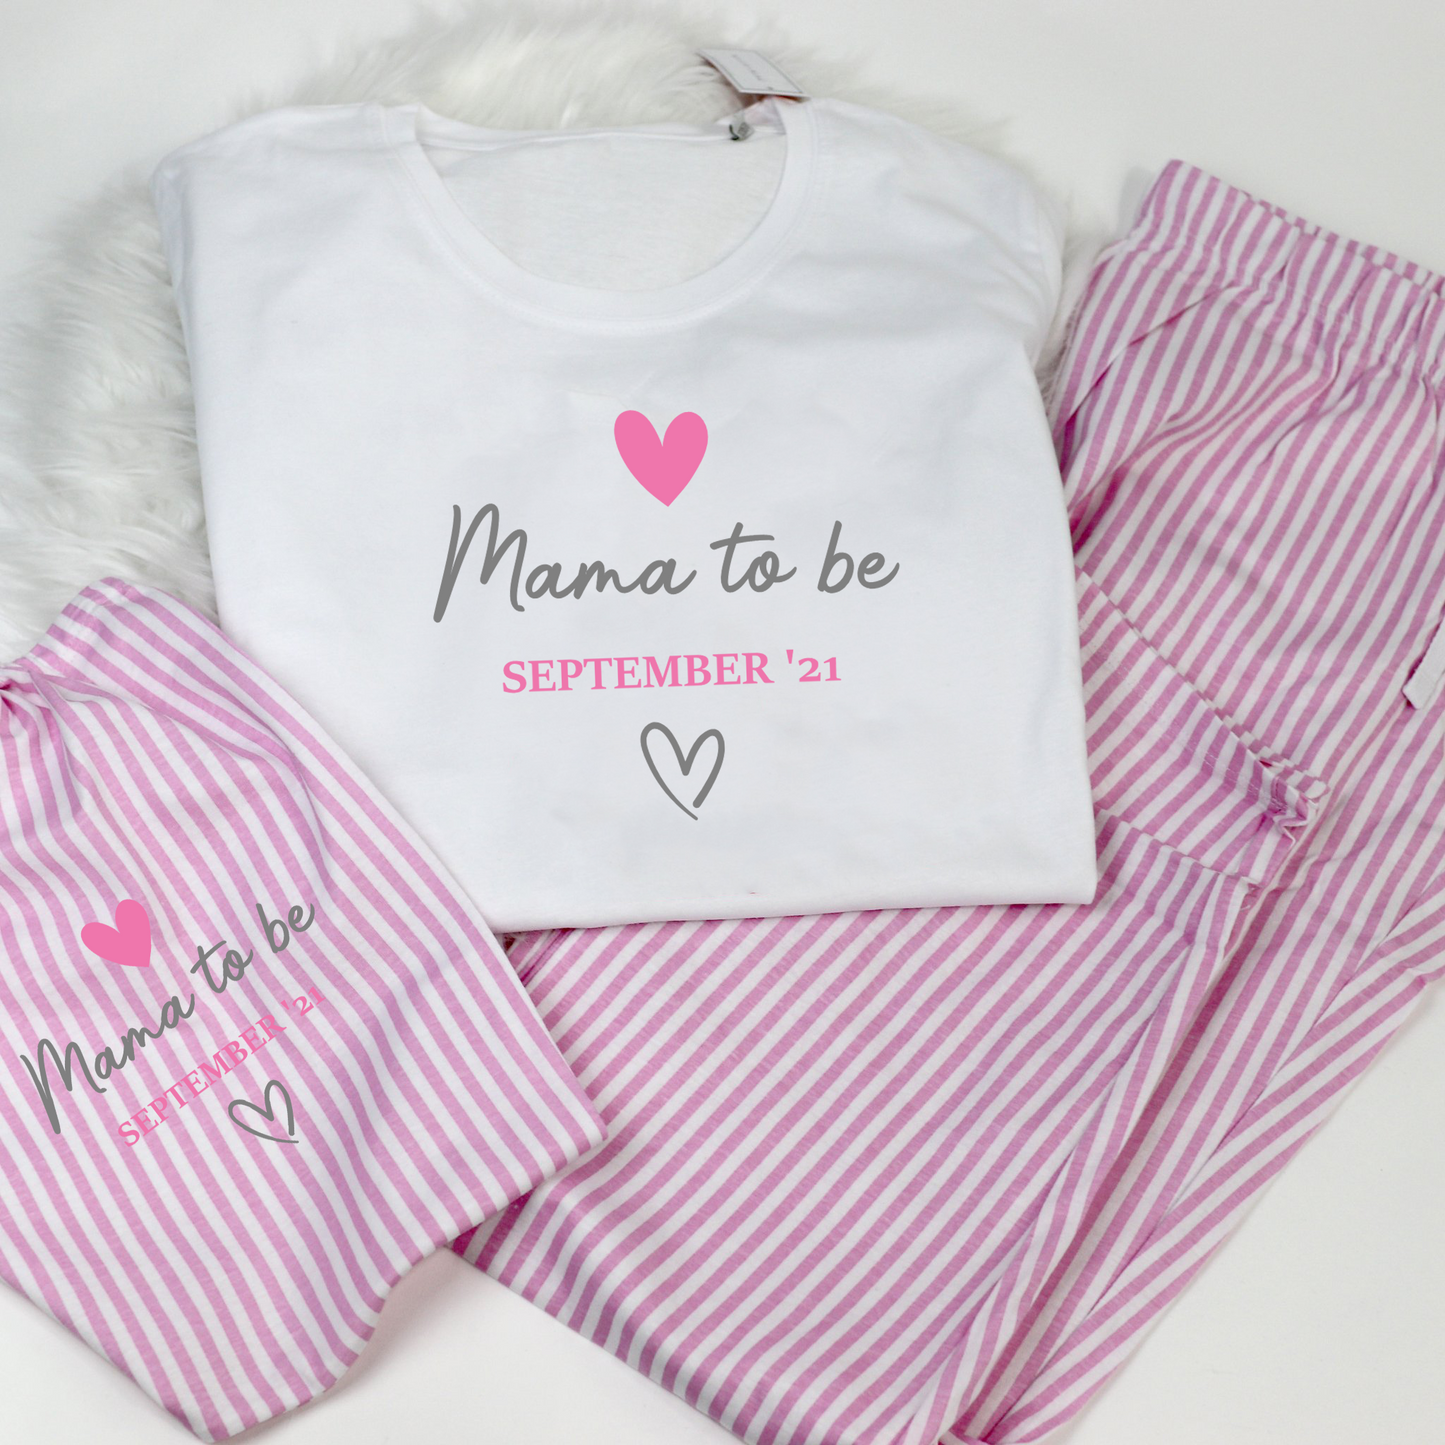 Mama To Be Adult Long Pj's in a Bag